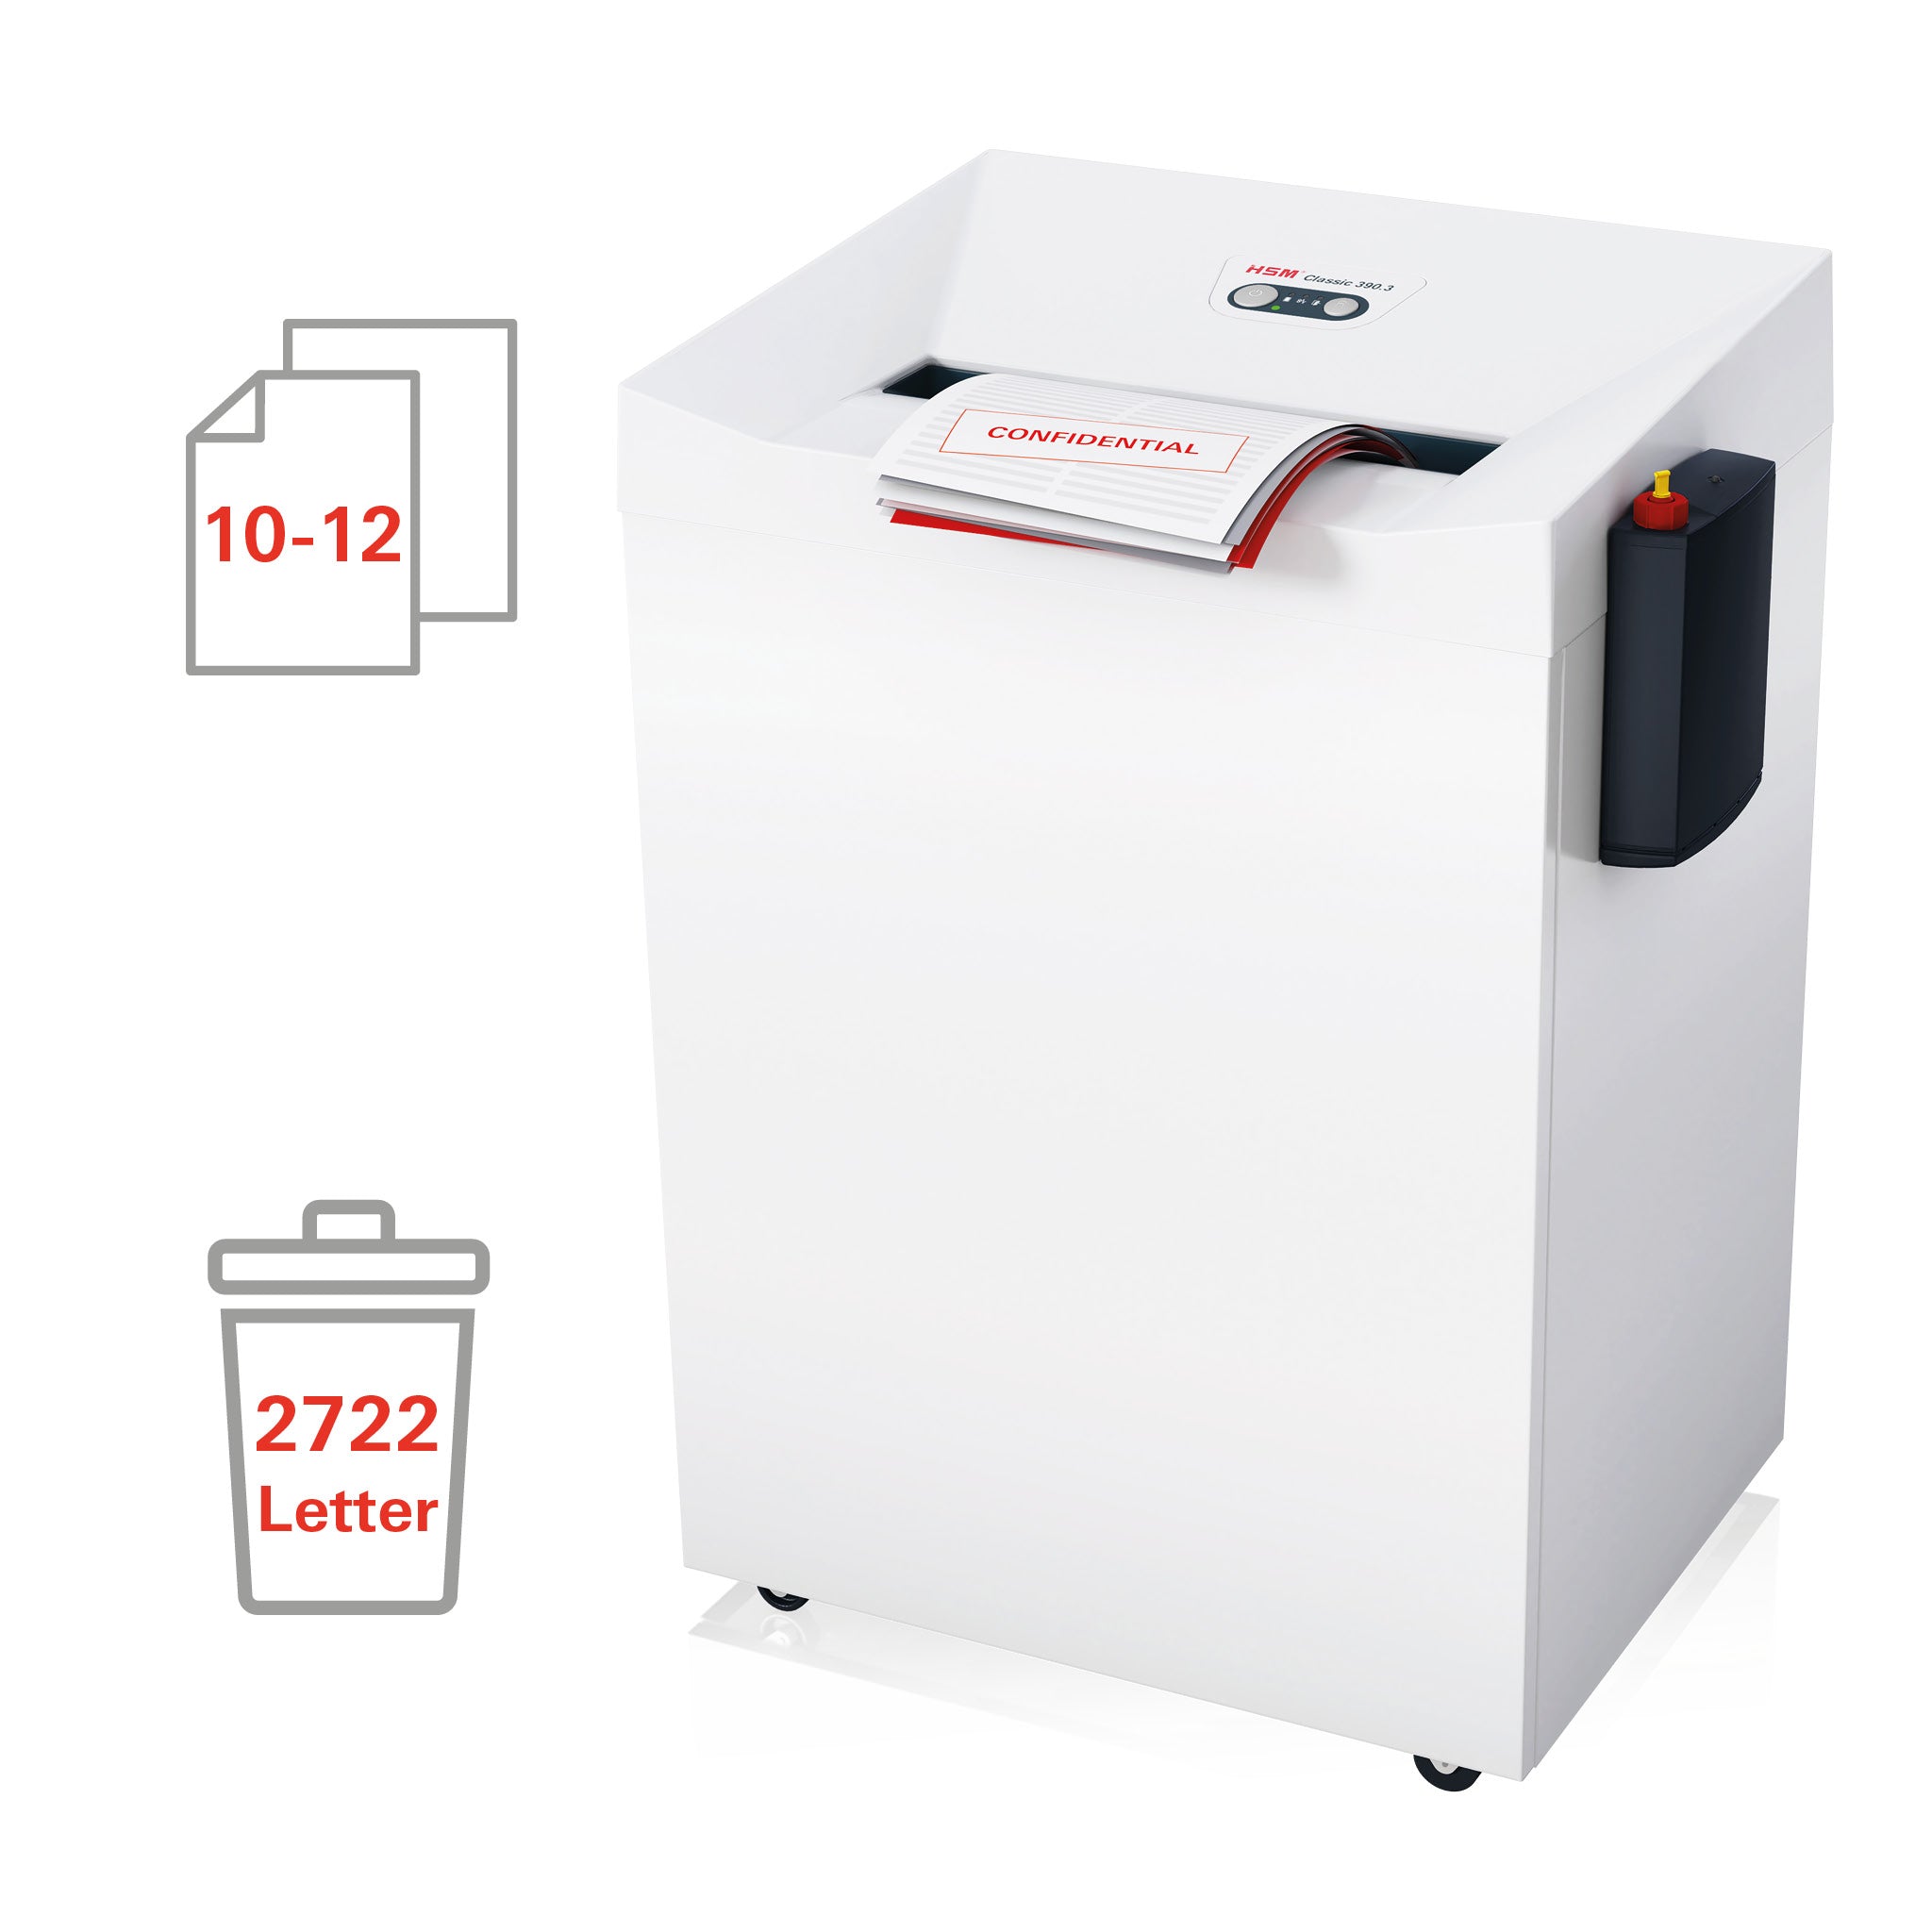 HSM Classic 390.3 Level P-7 Micro Cut Shredder with Automatic Oiler